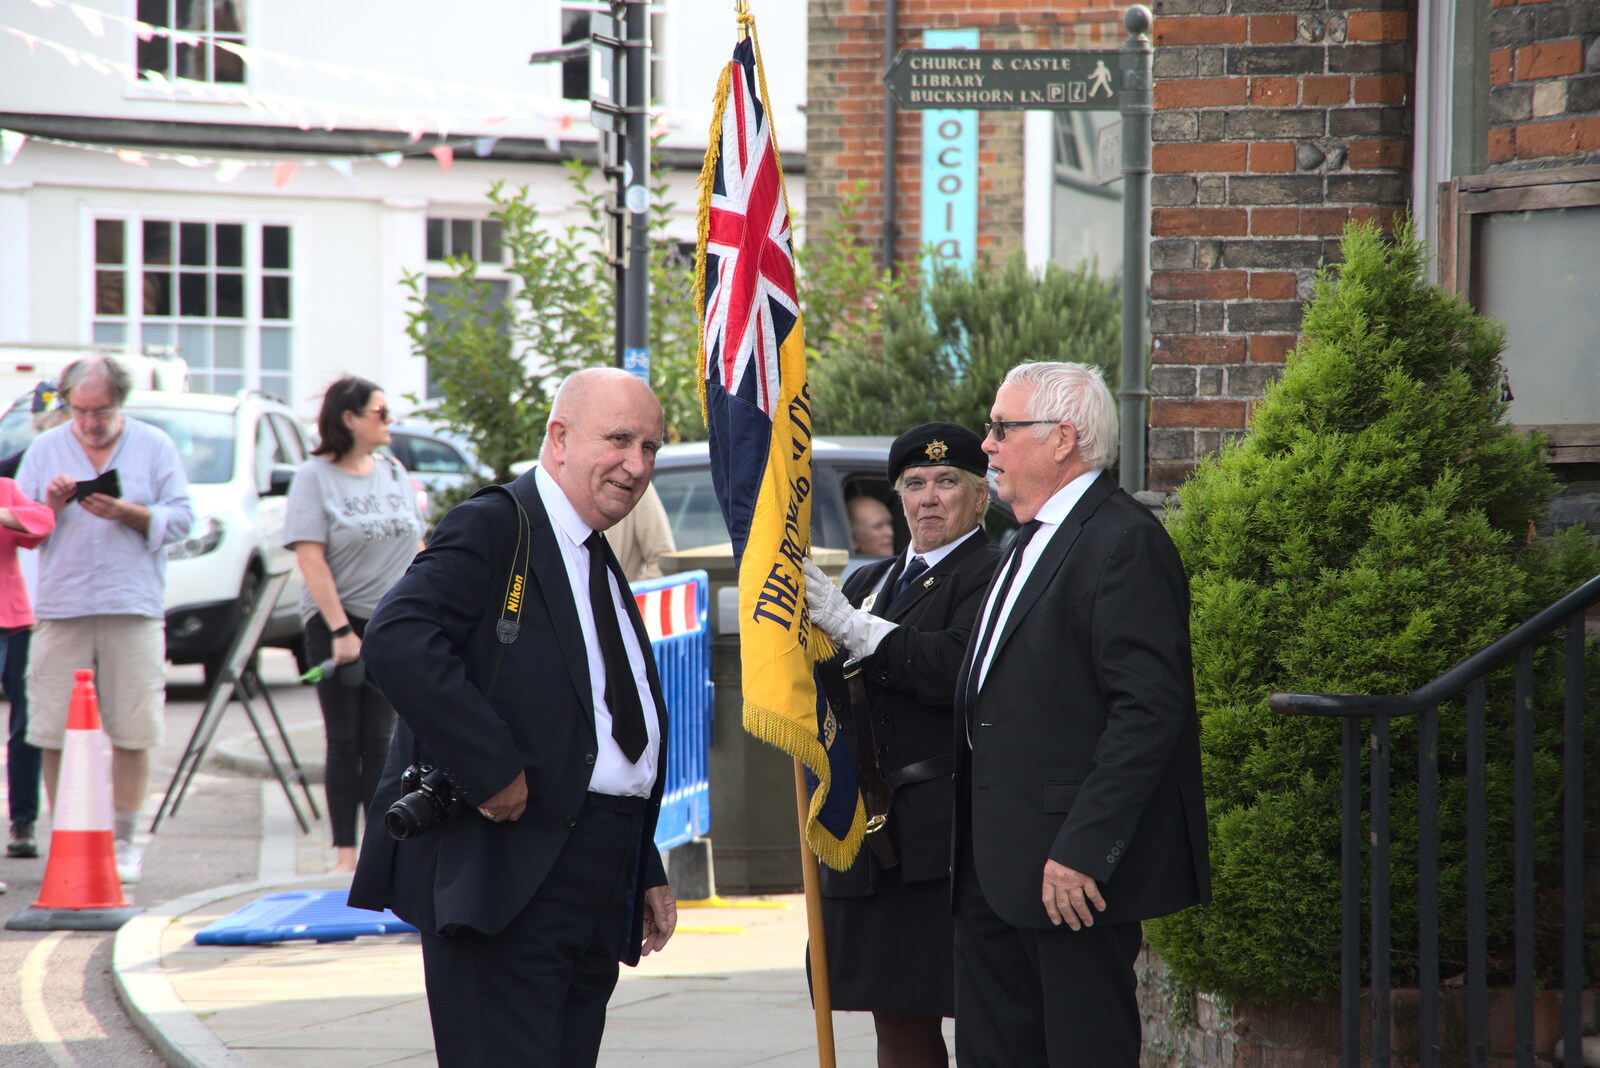 Italian Cars and a Royal Proclamation, Eye, Suffolk - 11th September 2022: The Royal British Legion flag-bearer is in place